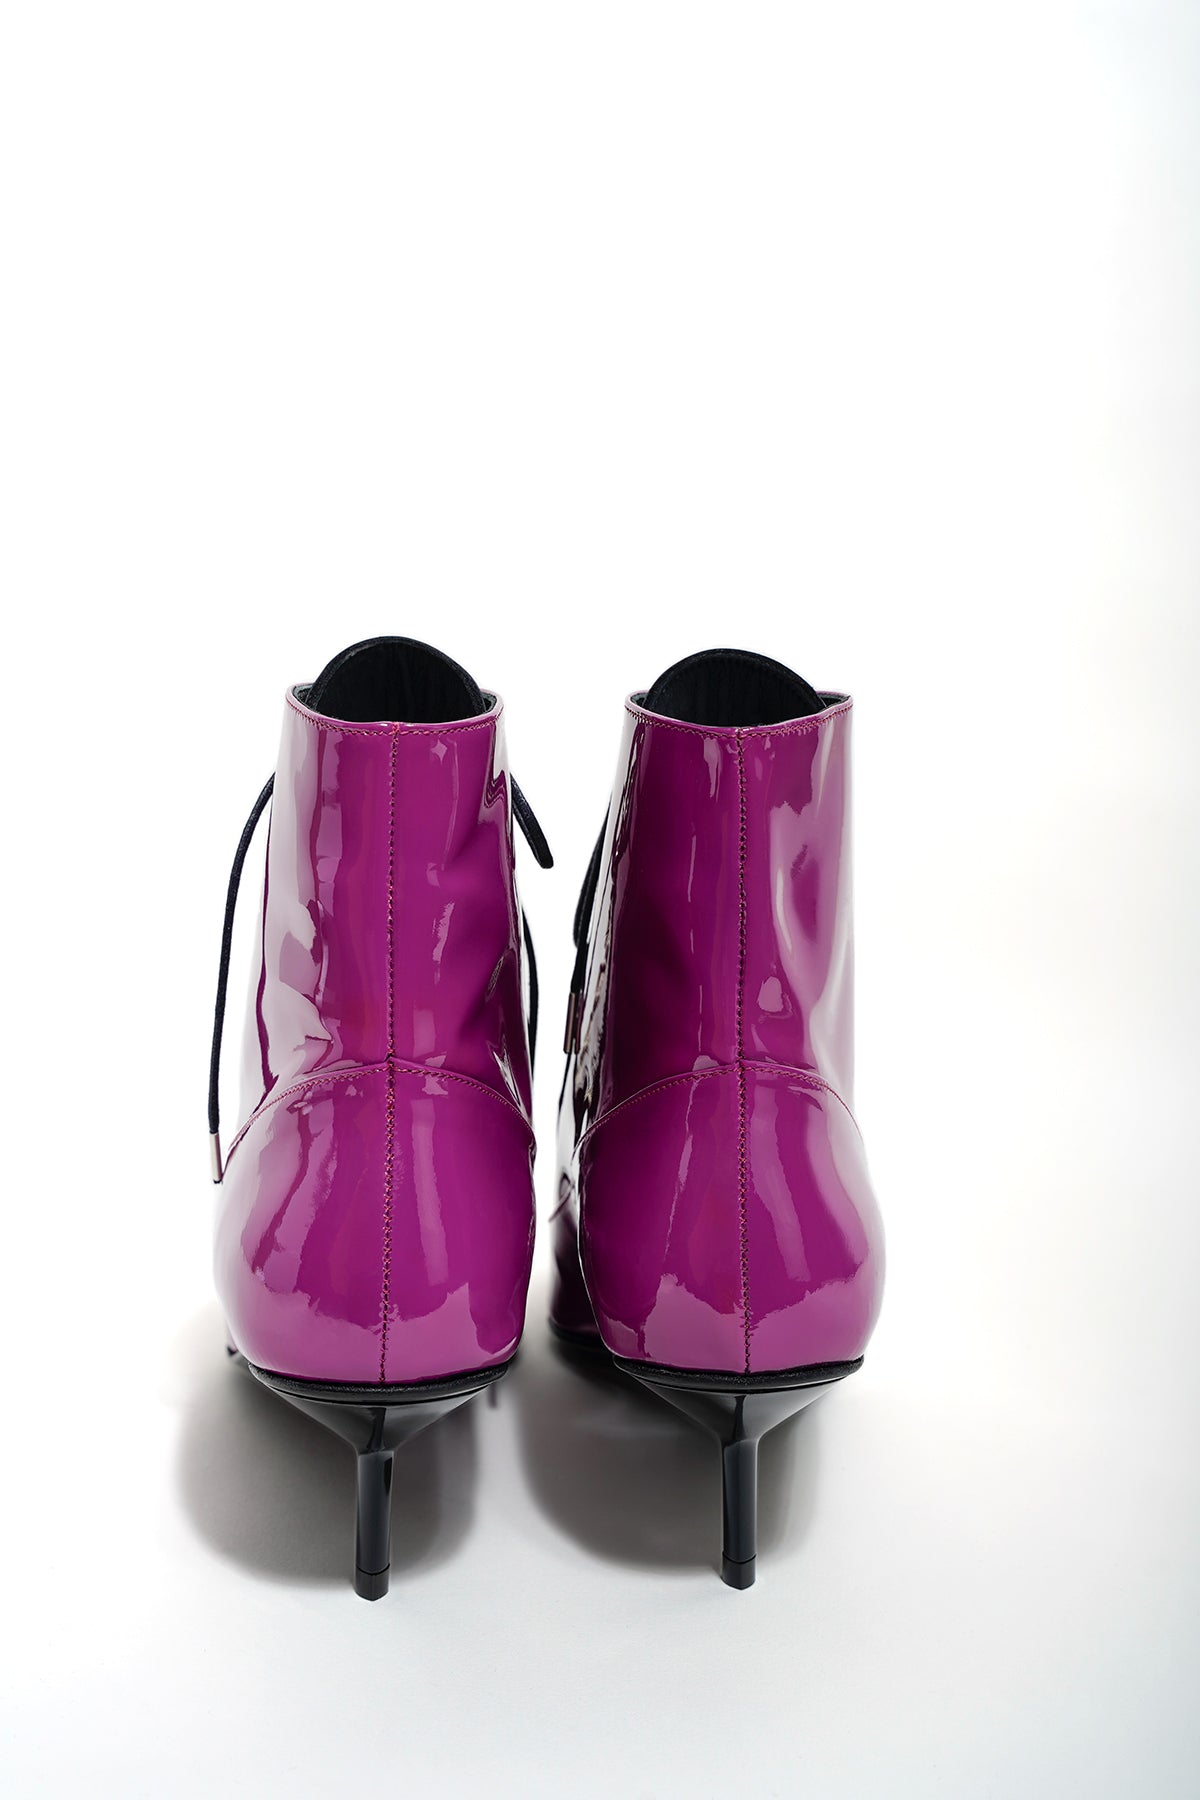 PURPLE FITTED BOOTS marques almeida